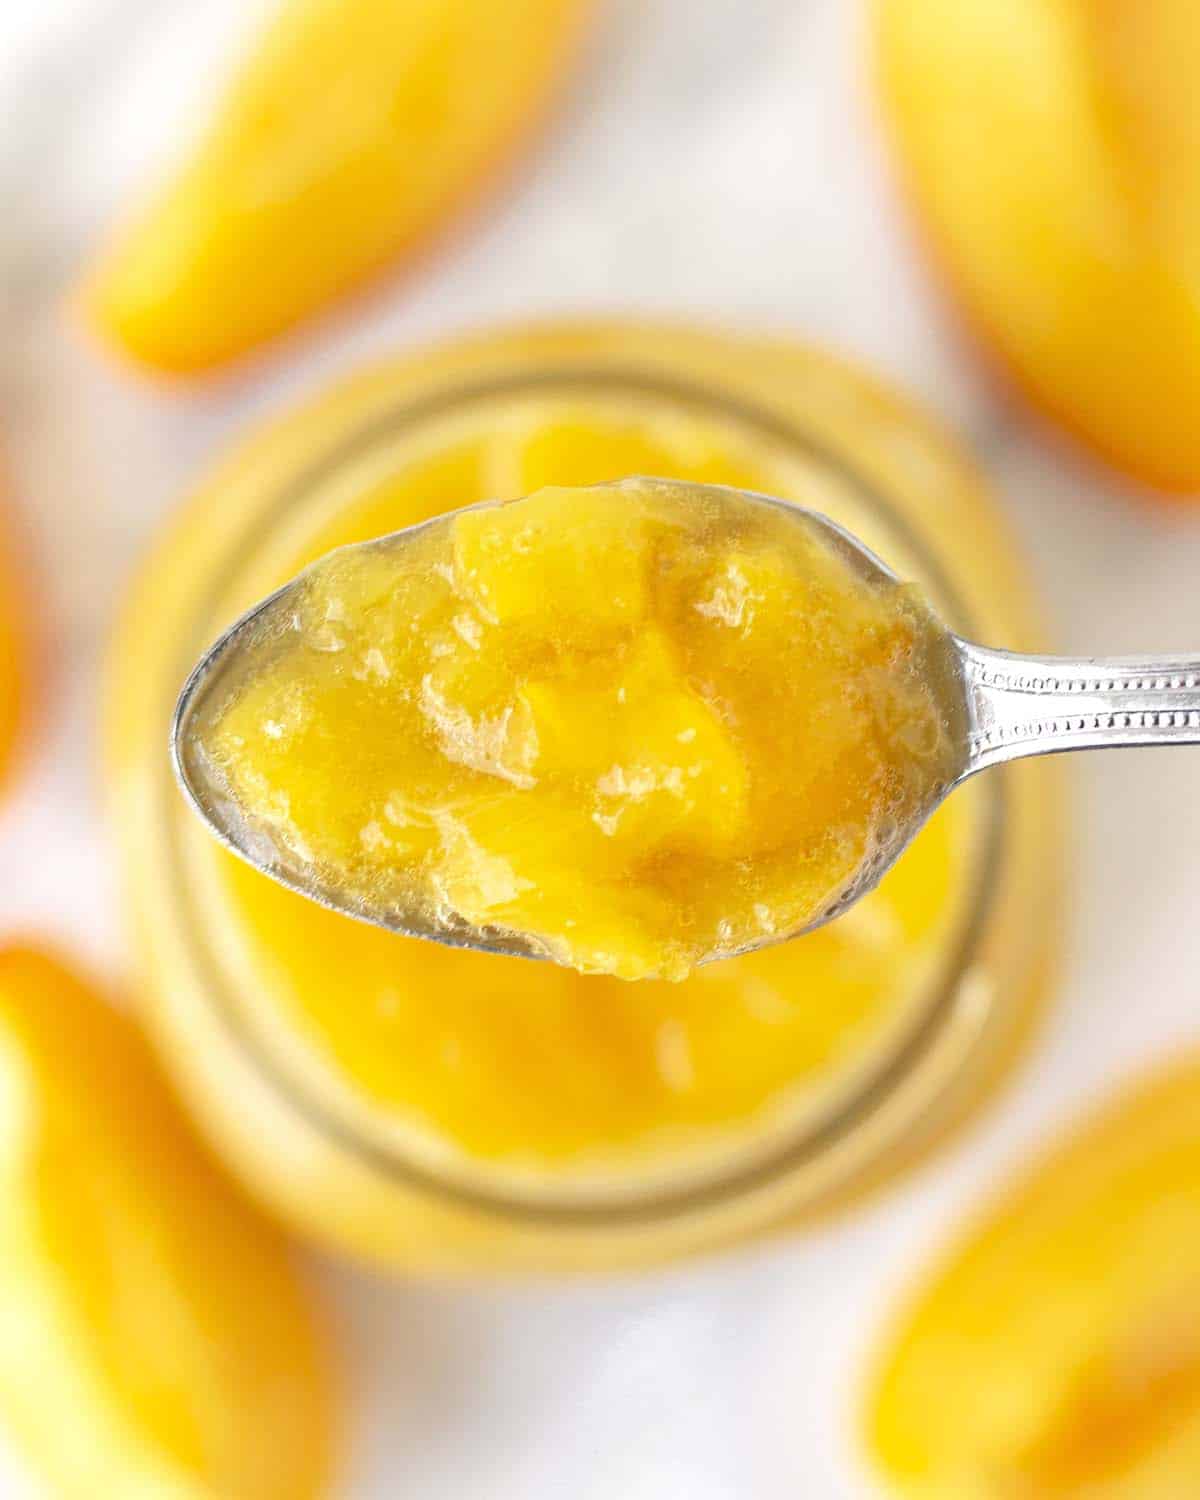 A teaspoon filled with peach sauce; the spoon is being held over a jar of the same sauce.